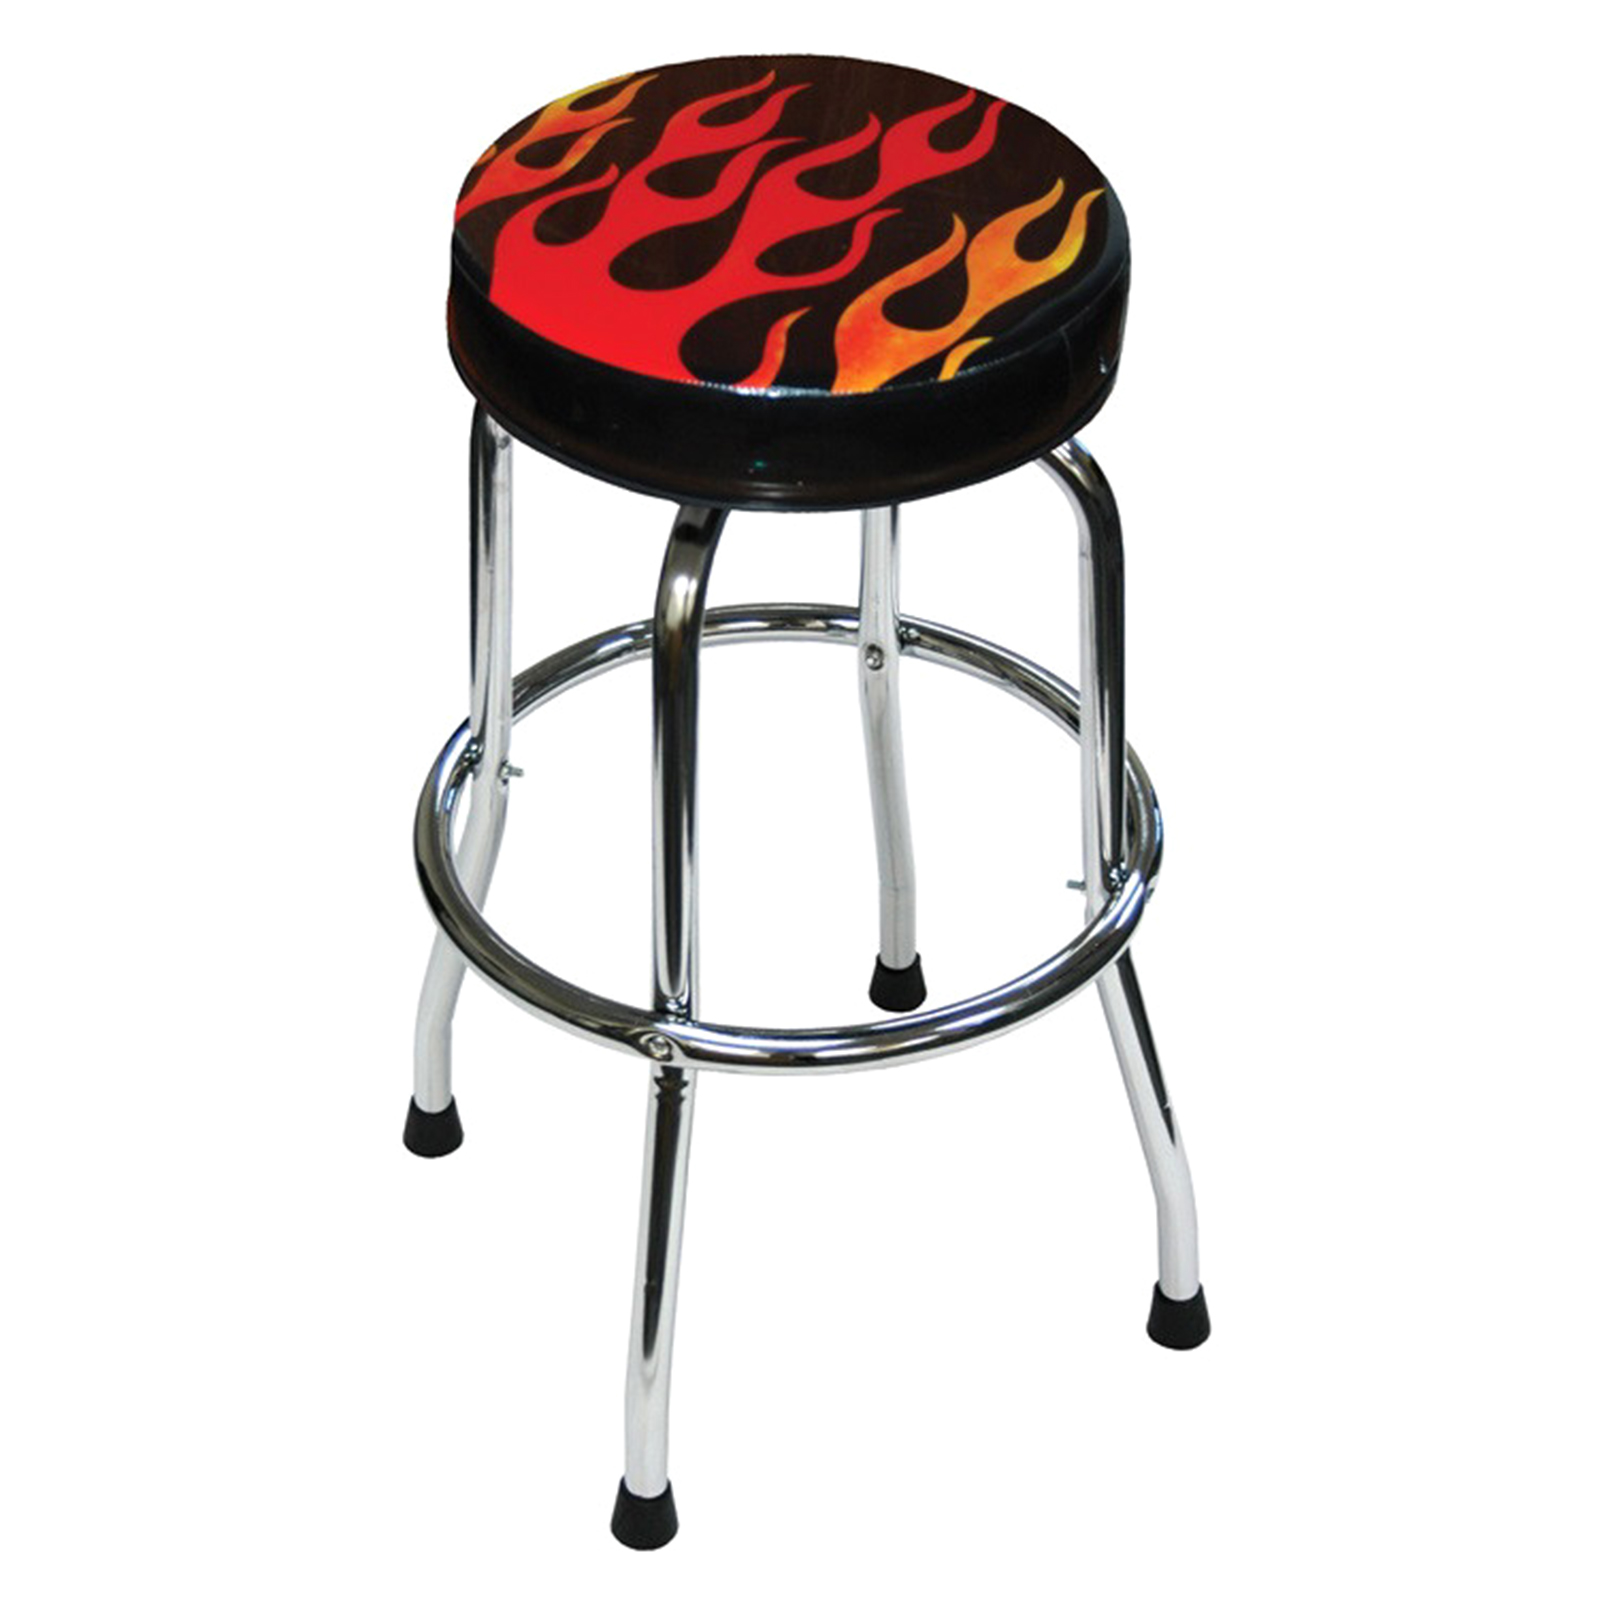 ATD 81056 Shop Stool with Flame Design